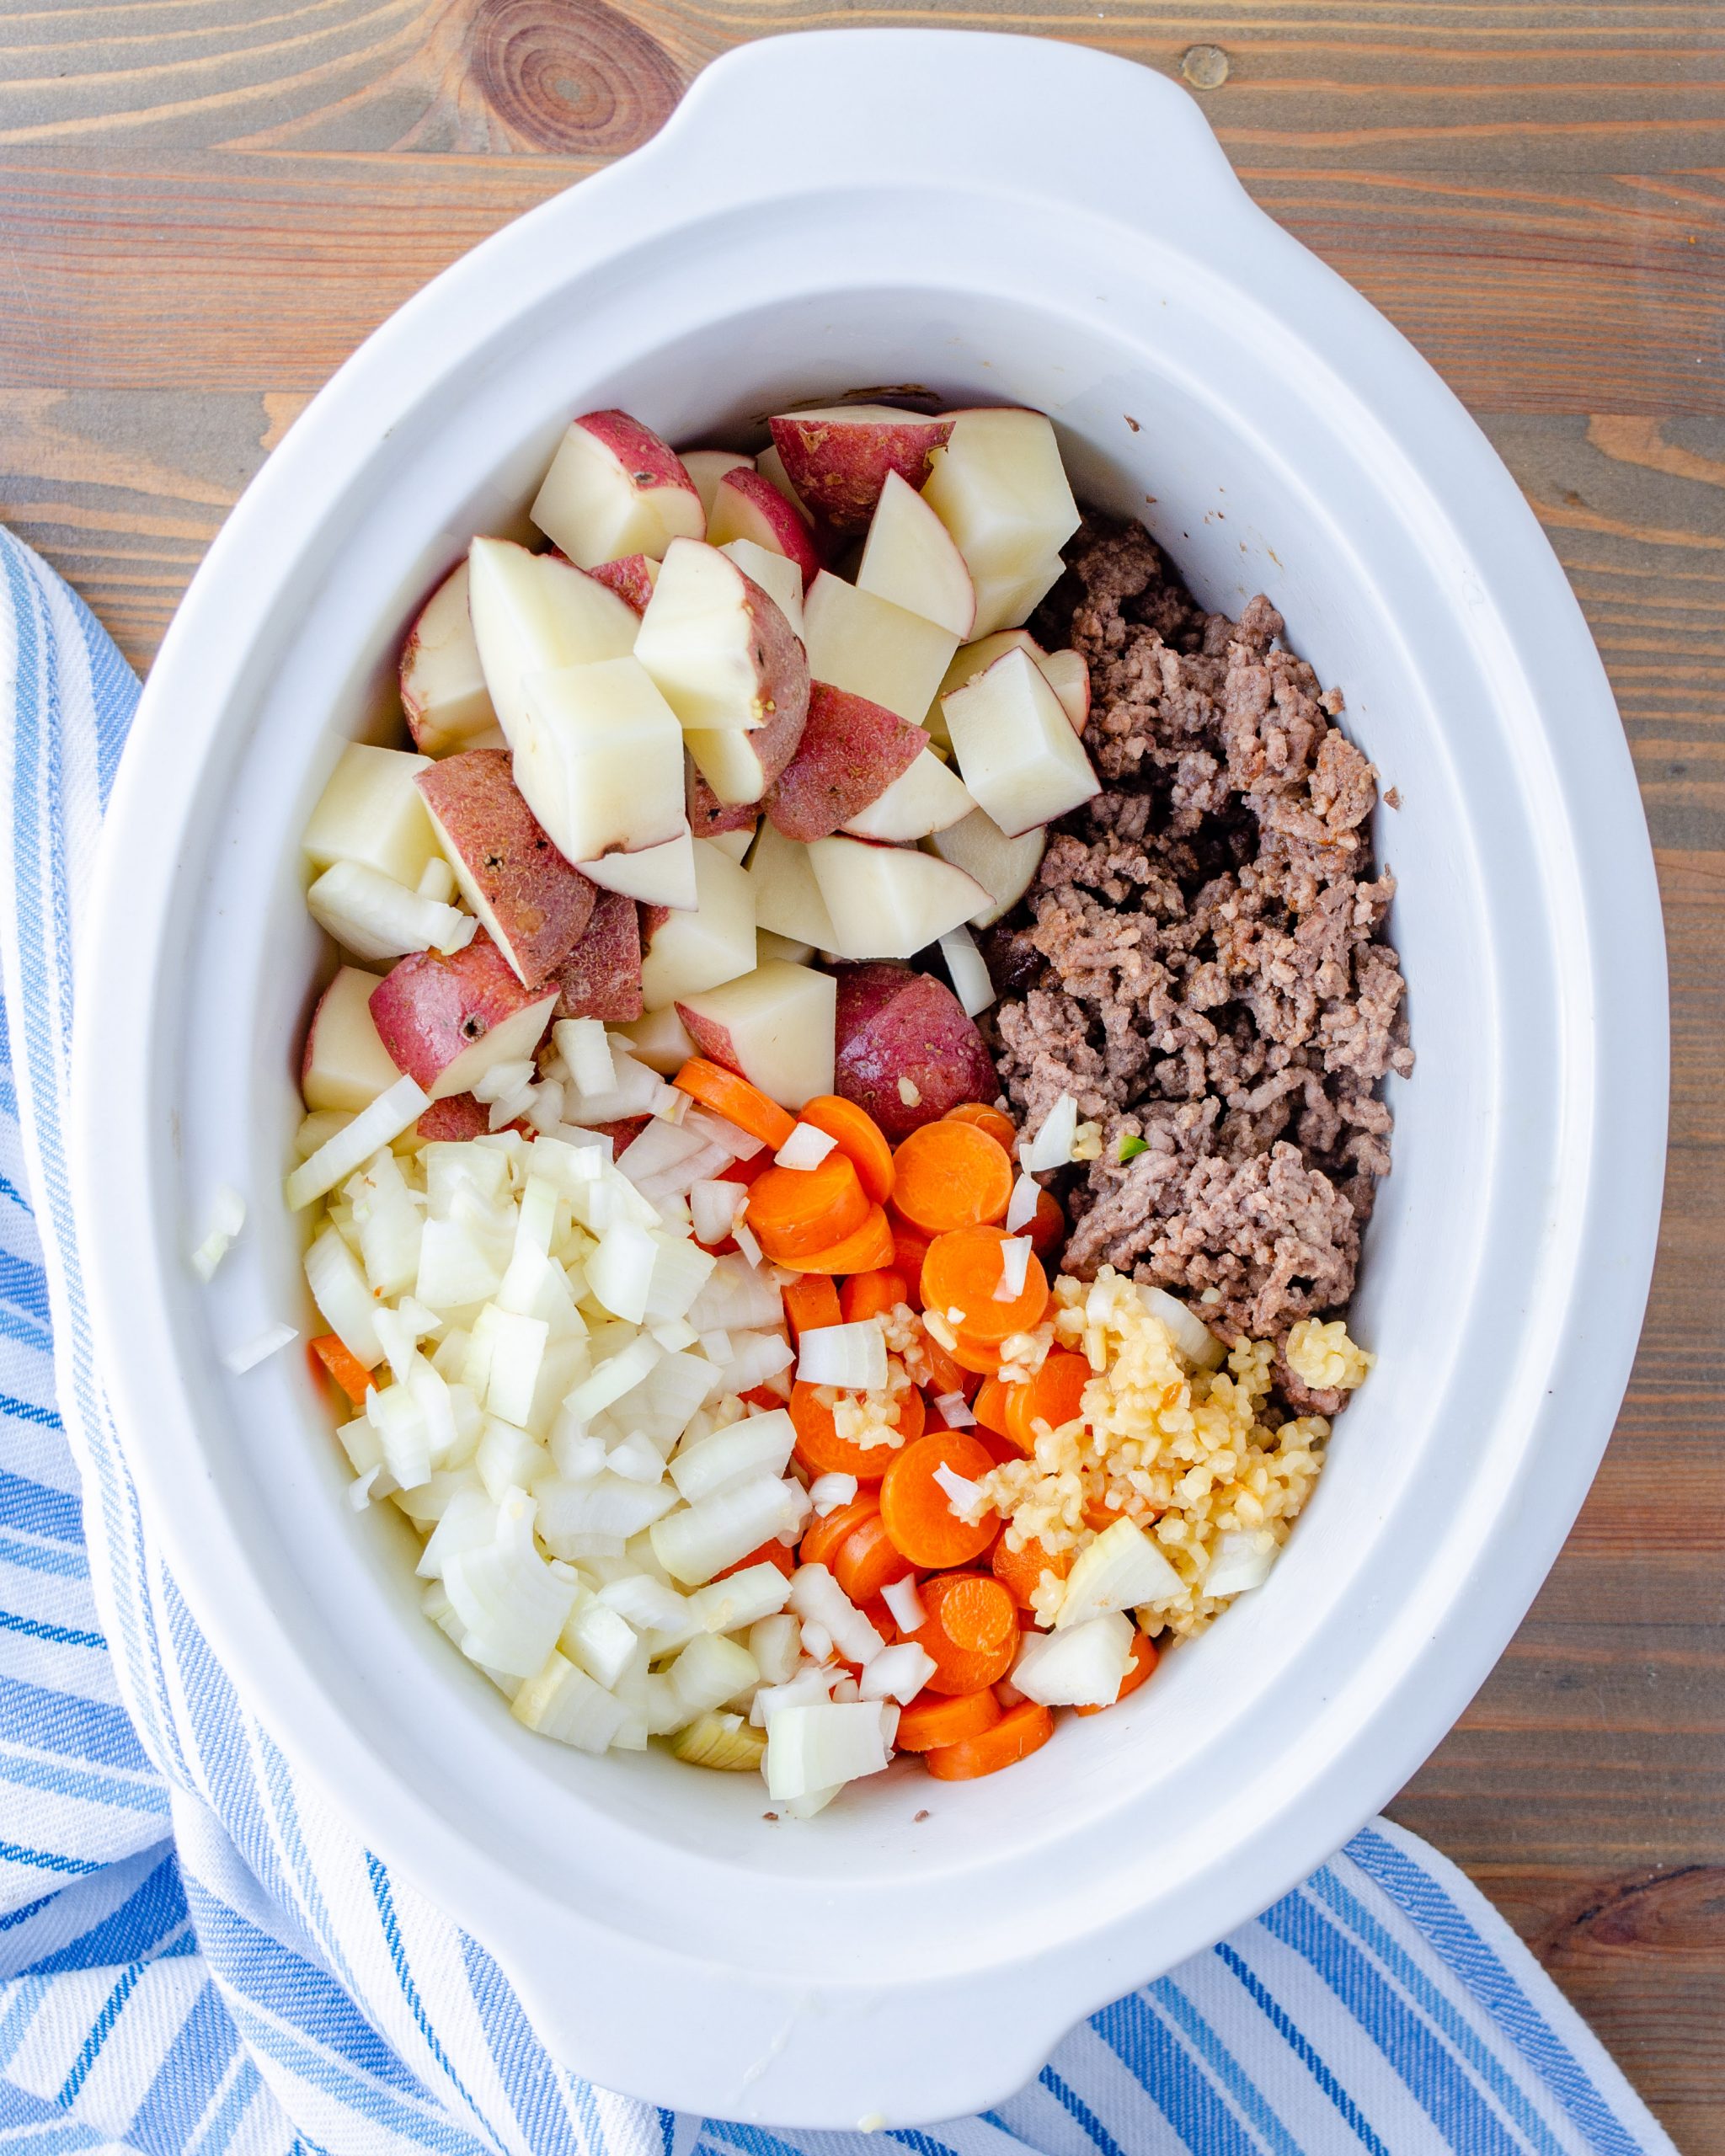 Place the ground beef into the slow cooker along with the potatoes, onions, and carrots. Stir to combine.